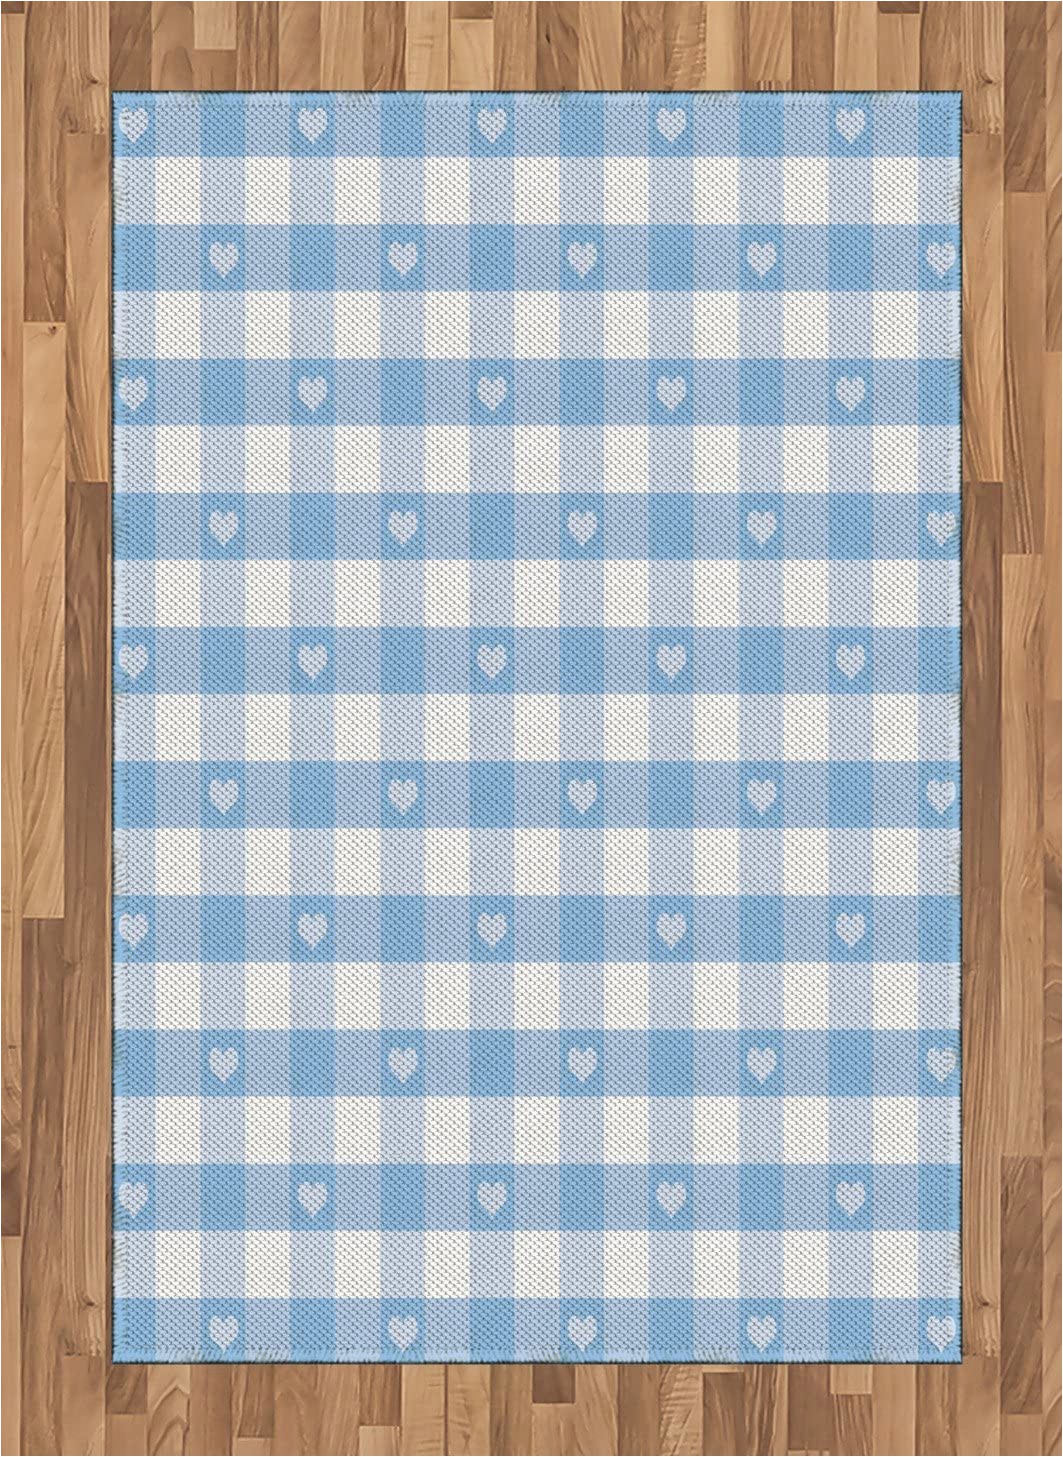 Blue and White Check Rug Amazon Ambesonne Checkered area Rug Gingham Motif with